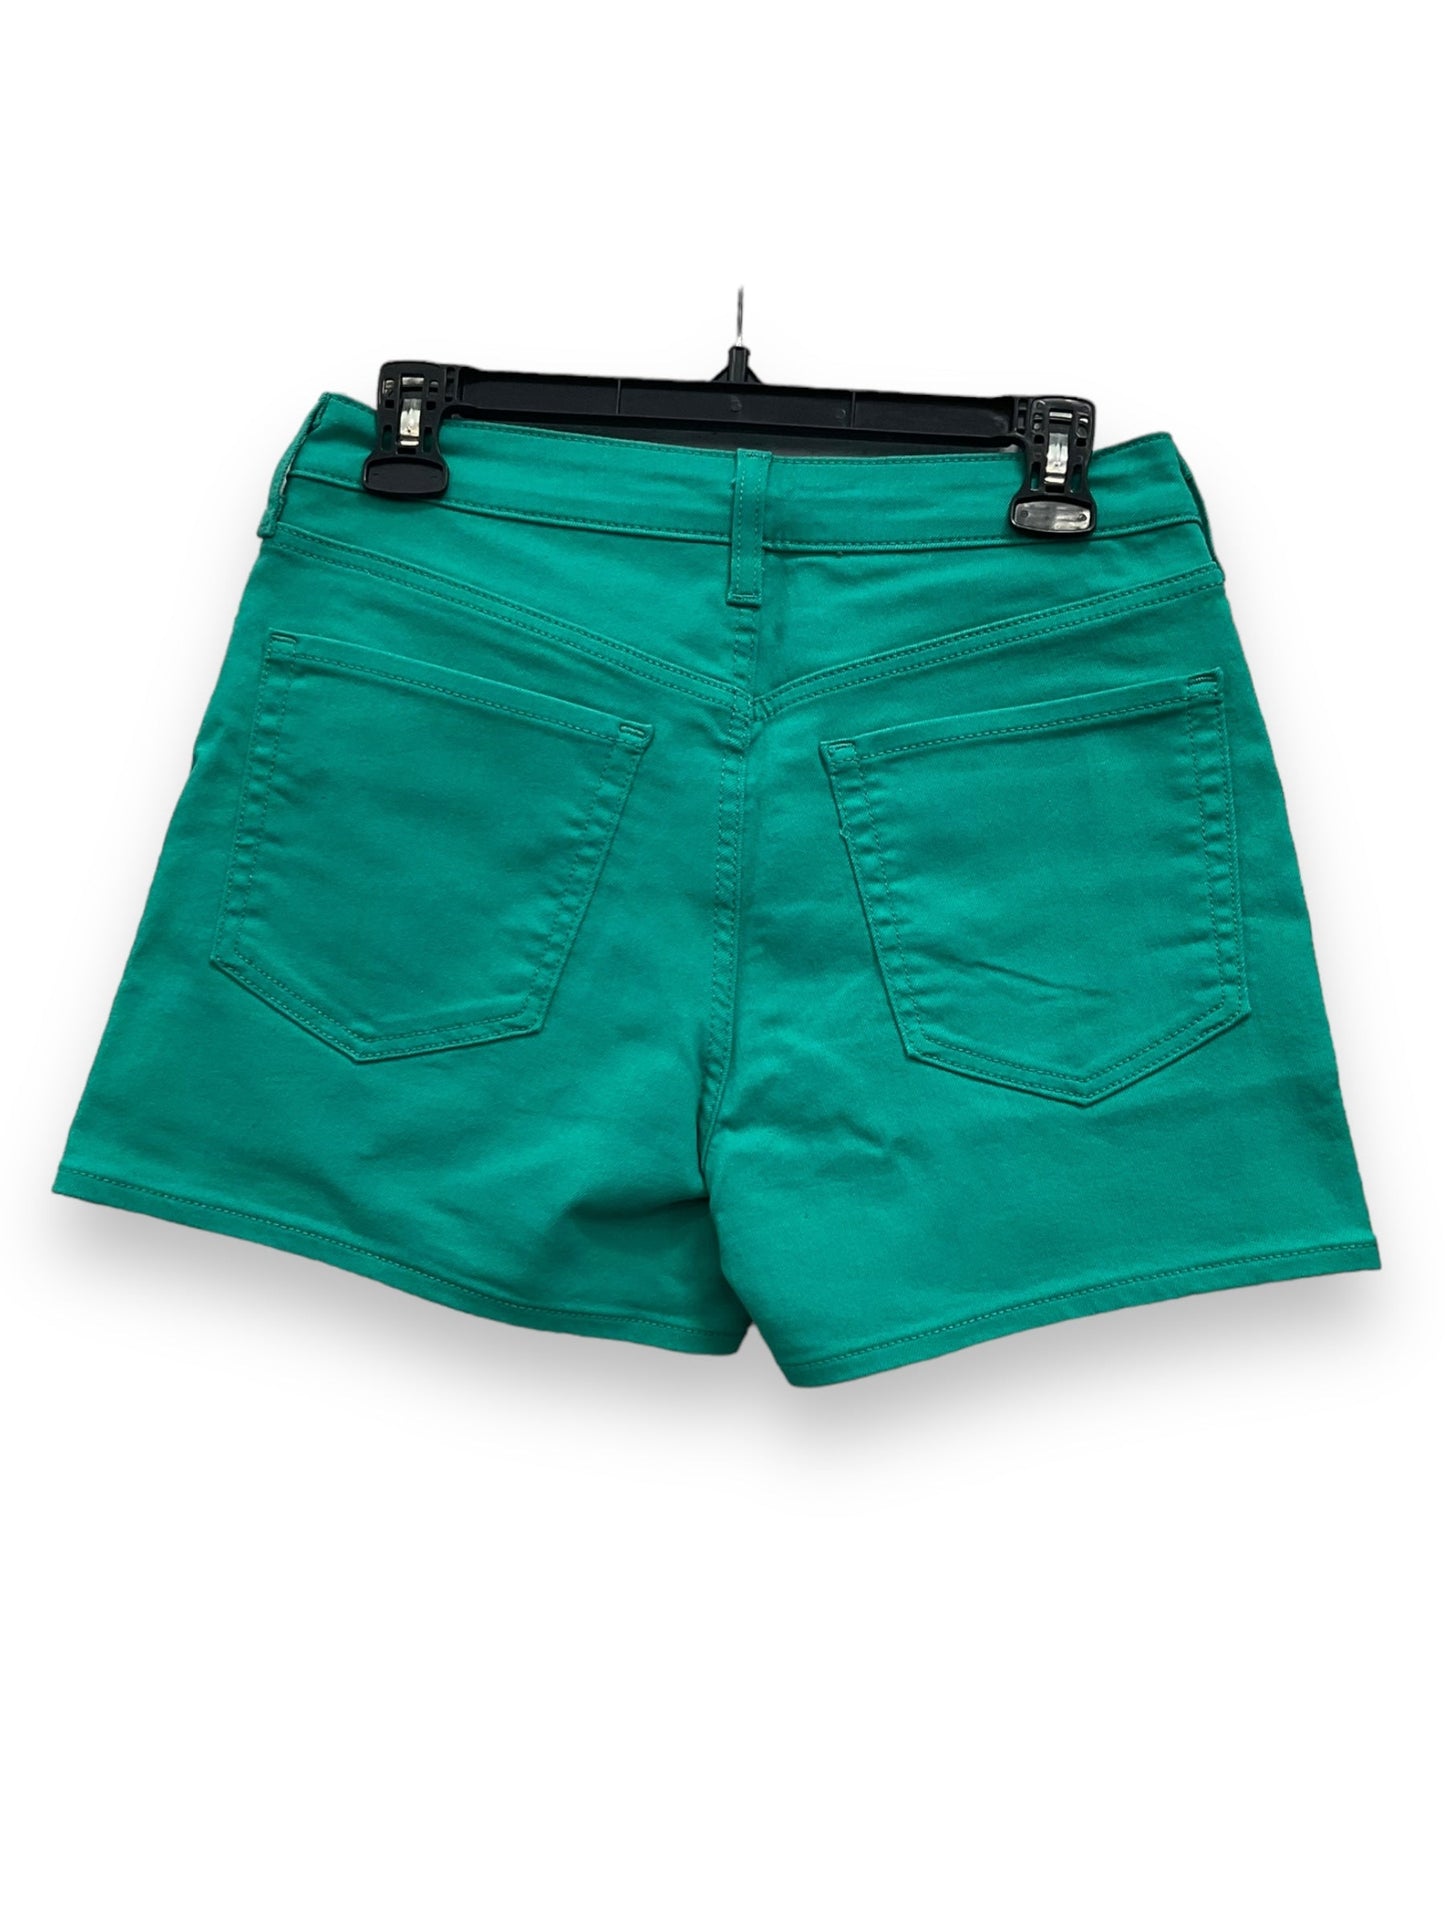 Green Shorts Old Navy, Size 4